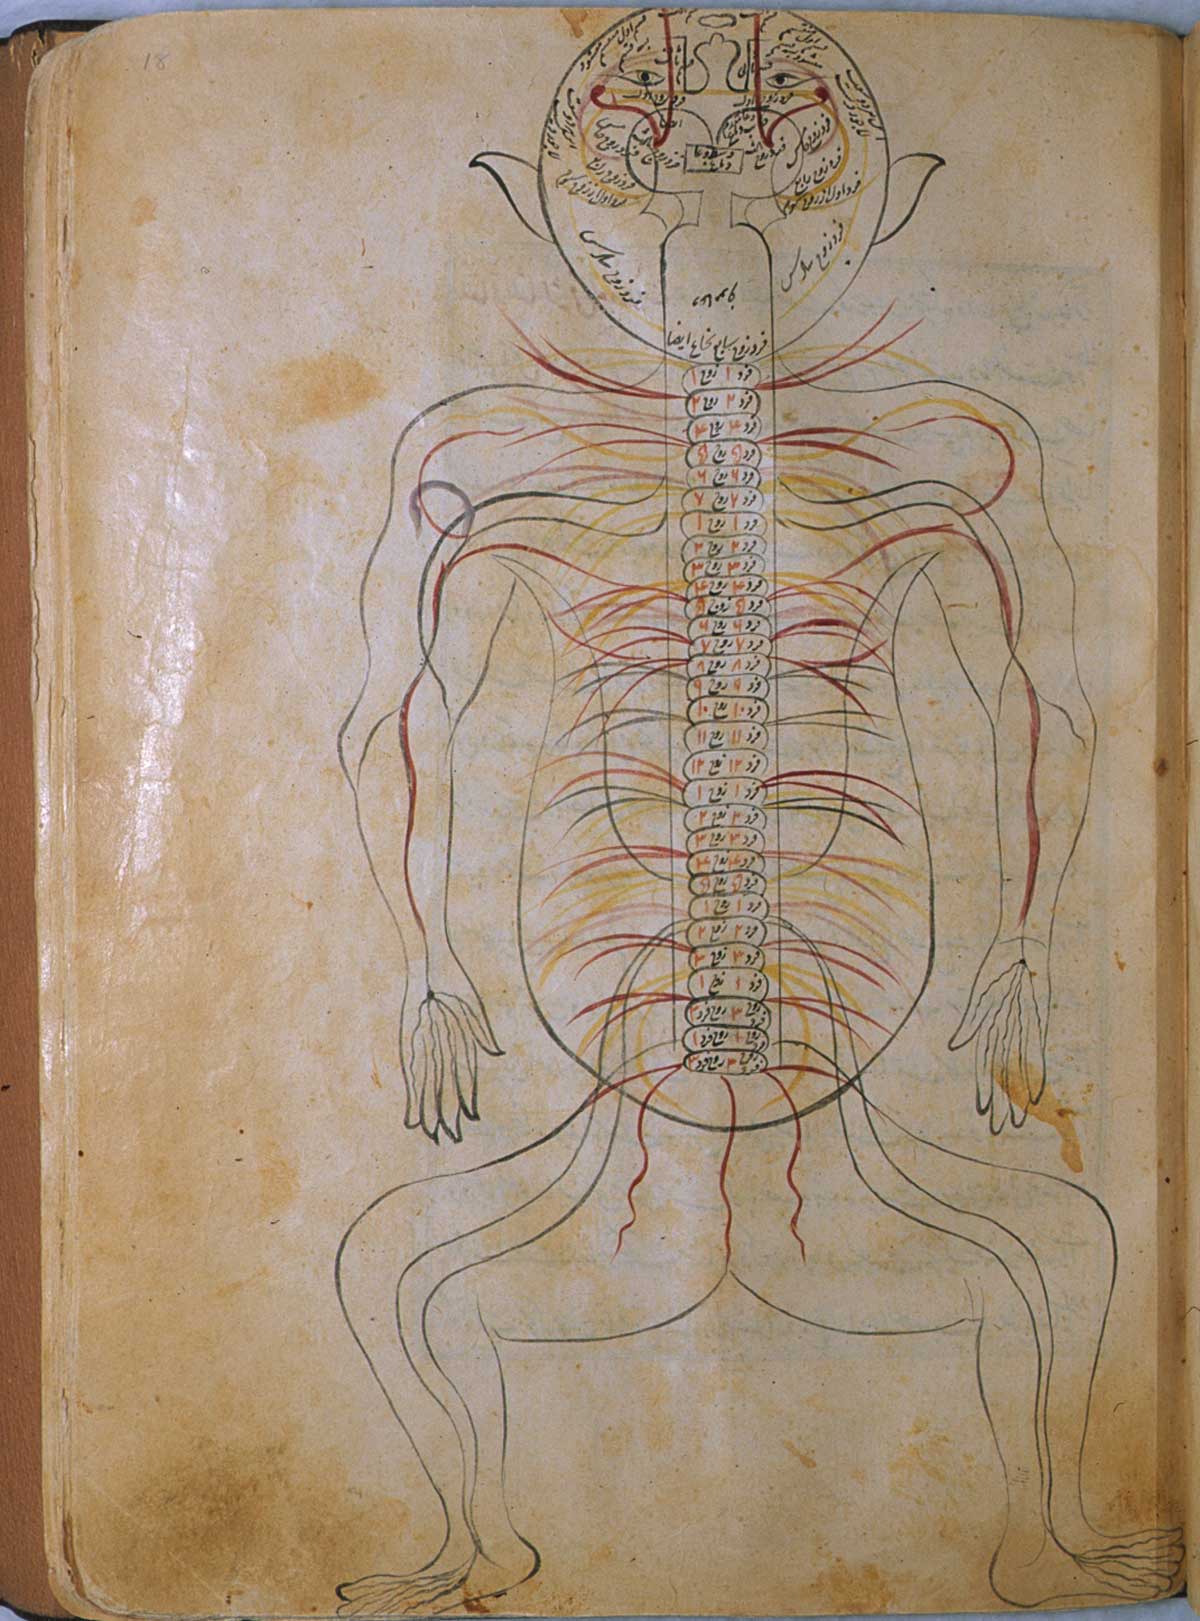 Folio 18a of Mansur ibn Ilyas' Tashrih-i badan-i insan, featuring the nervous system, with the figure drawn from the back and the nerves indicated in opaque watercolors.